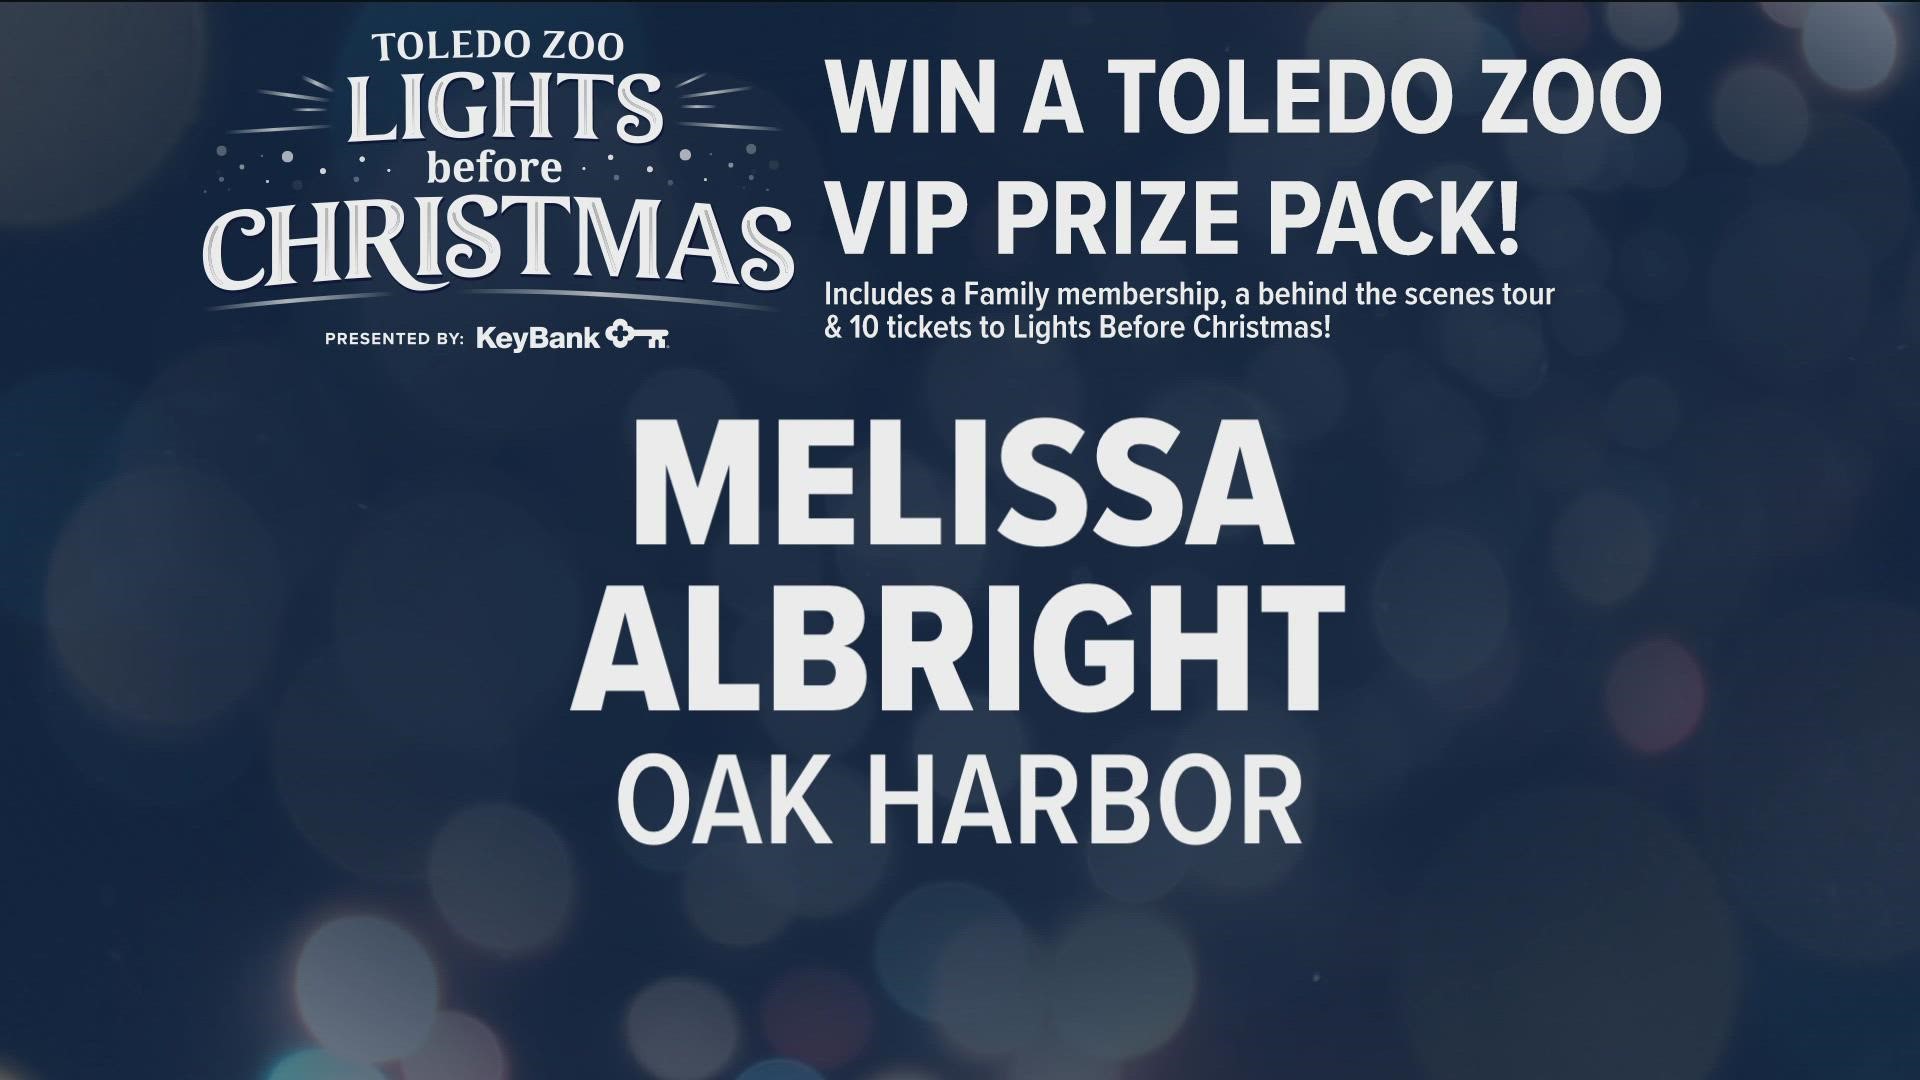 Toledo Zoo VIP Prize Pack drawing.